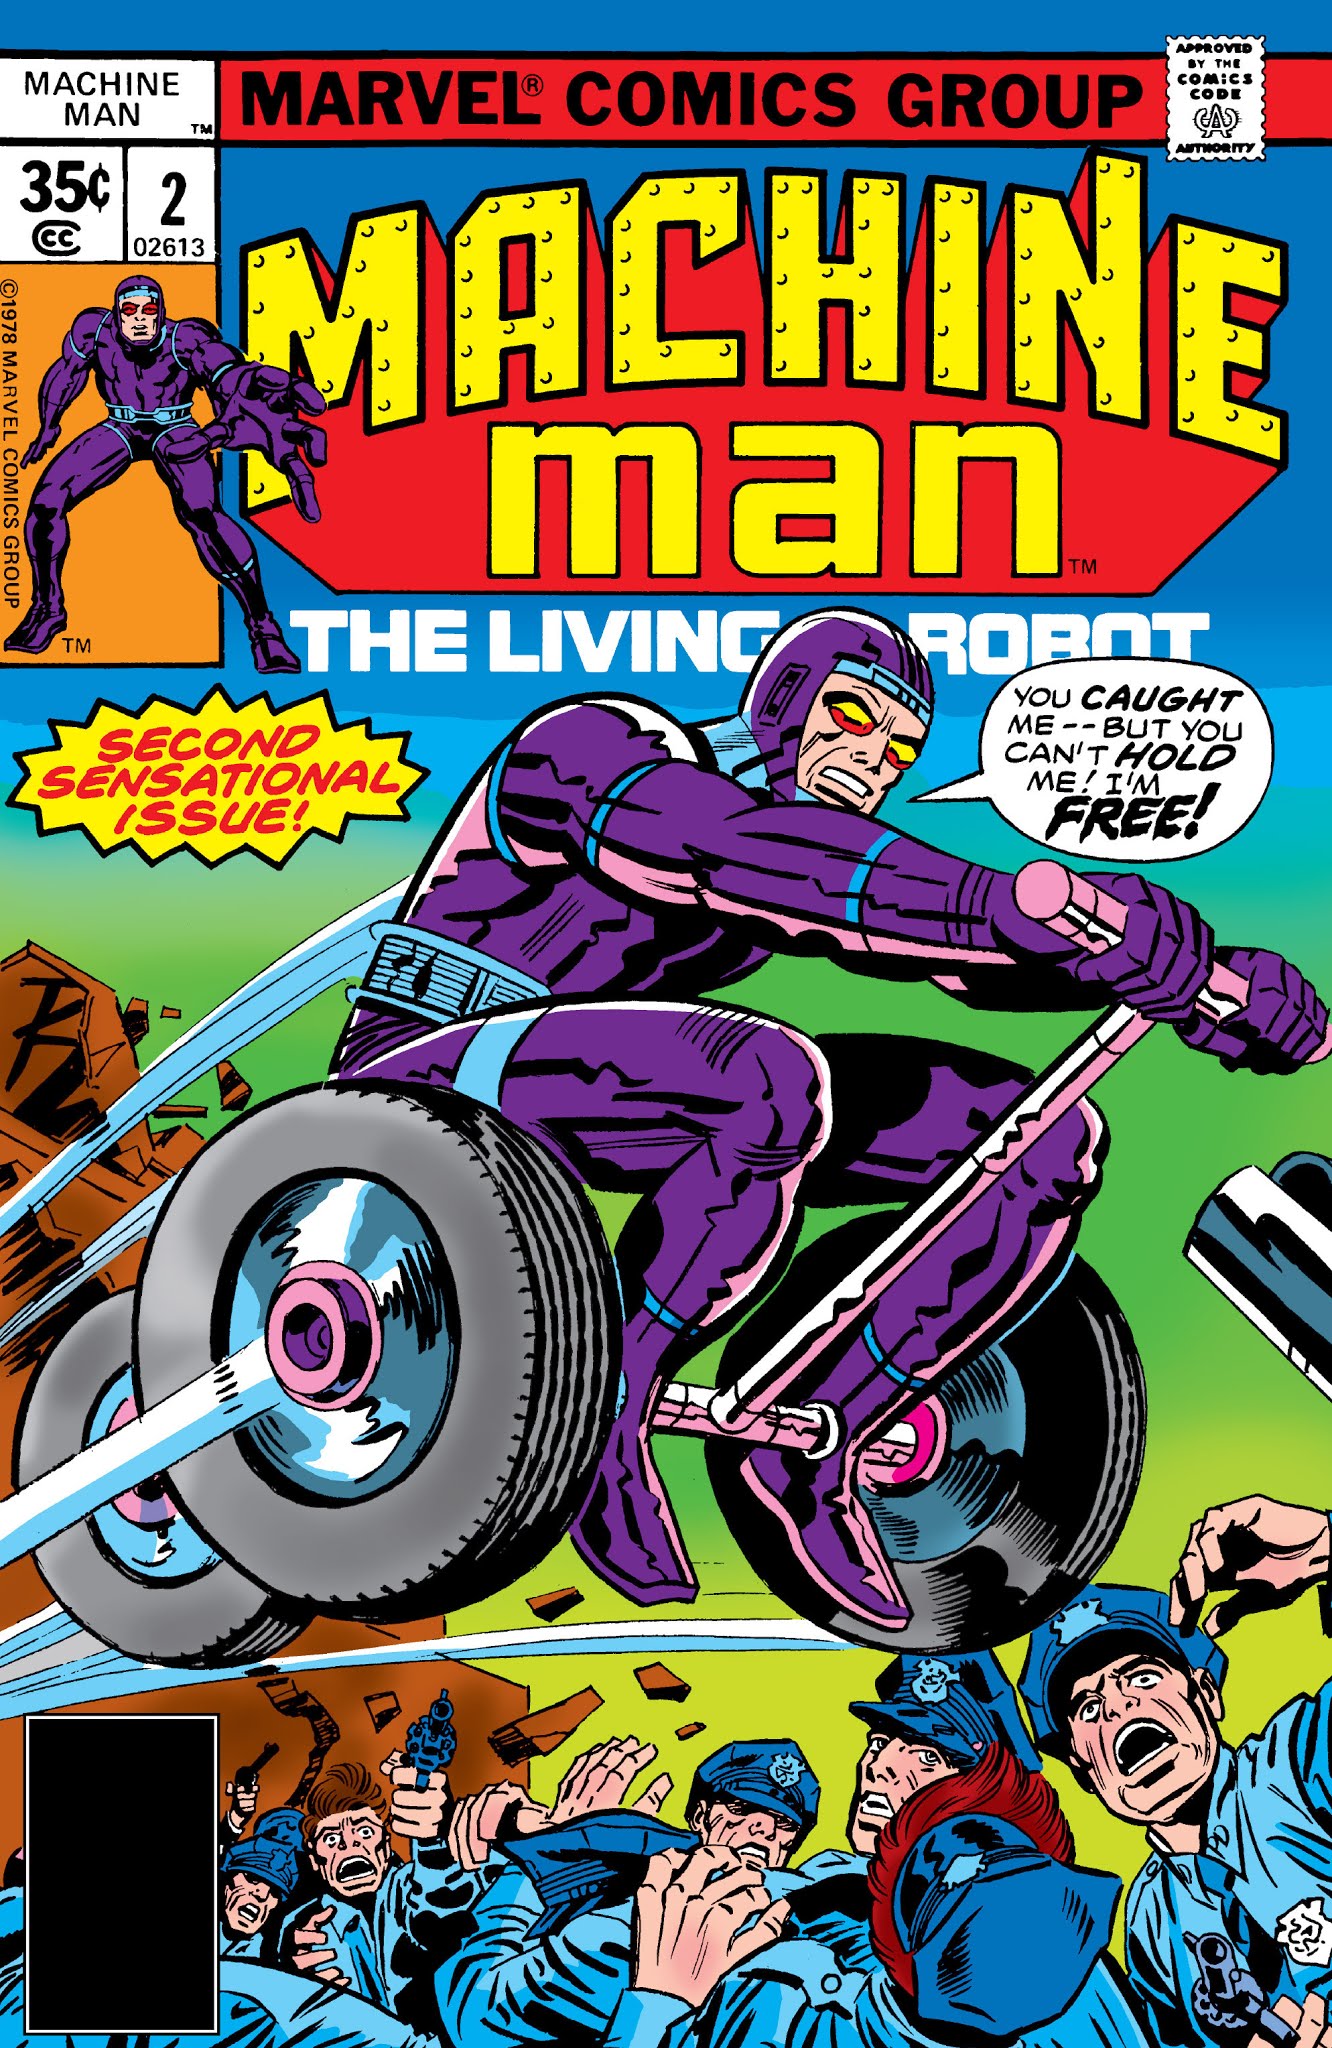 Read online Machine Man: The Complete Collection comic -  Issue # TPB (Part 1) - 23